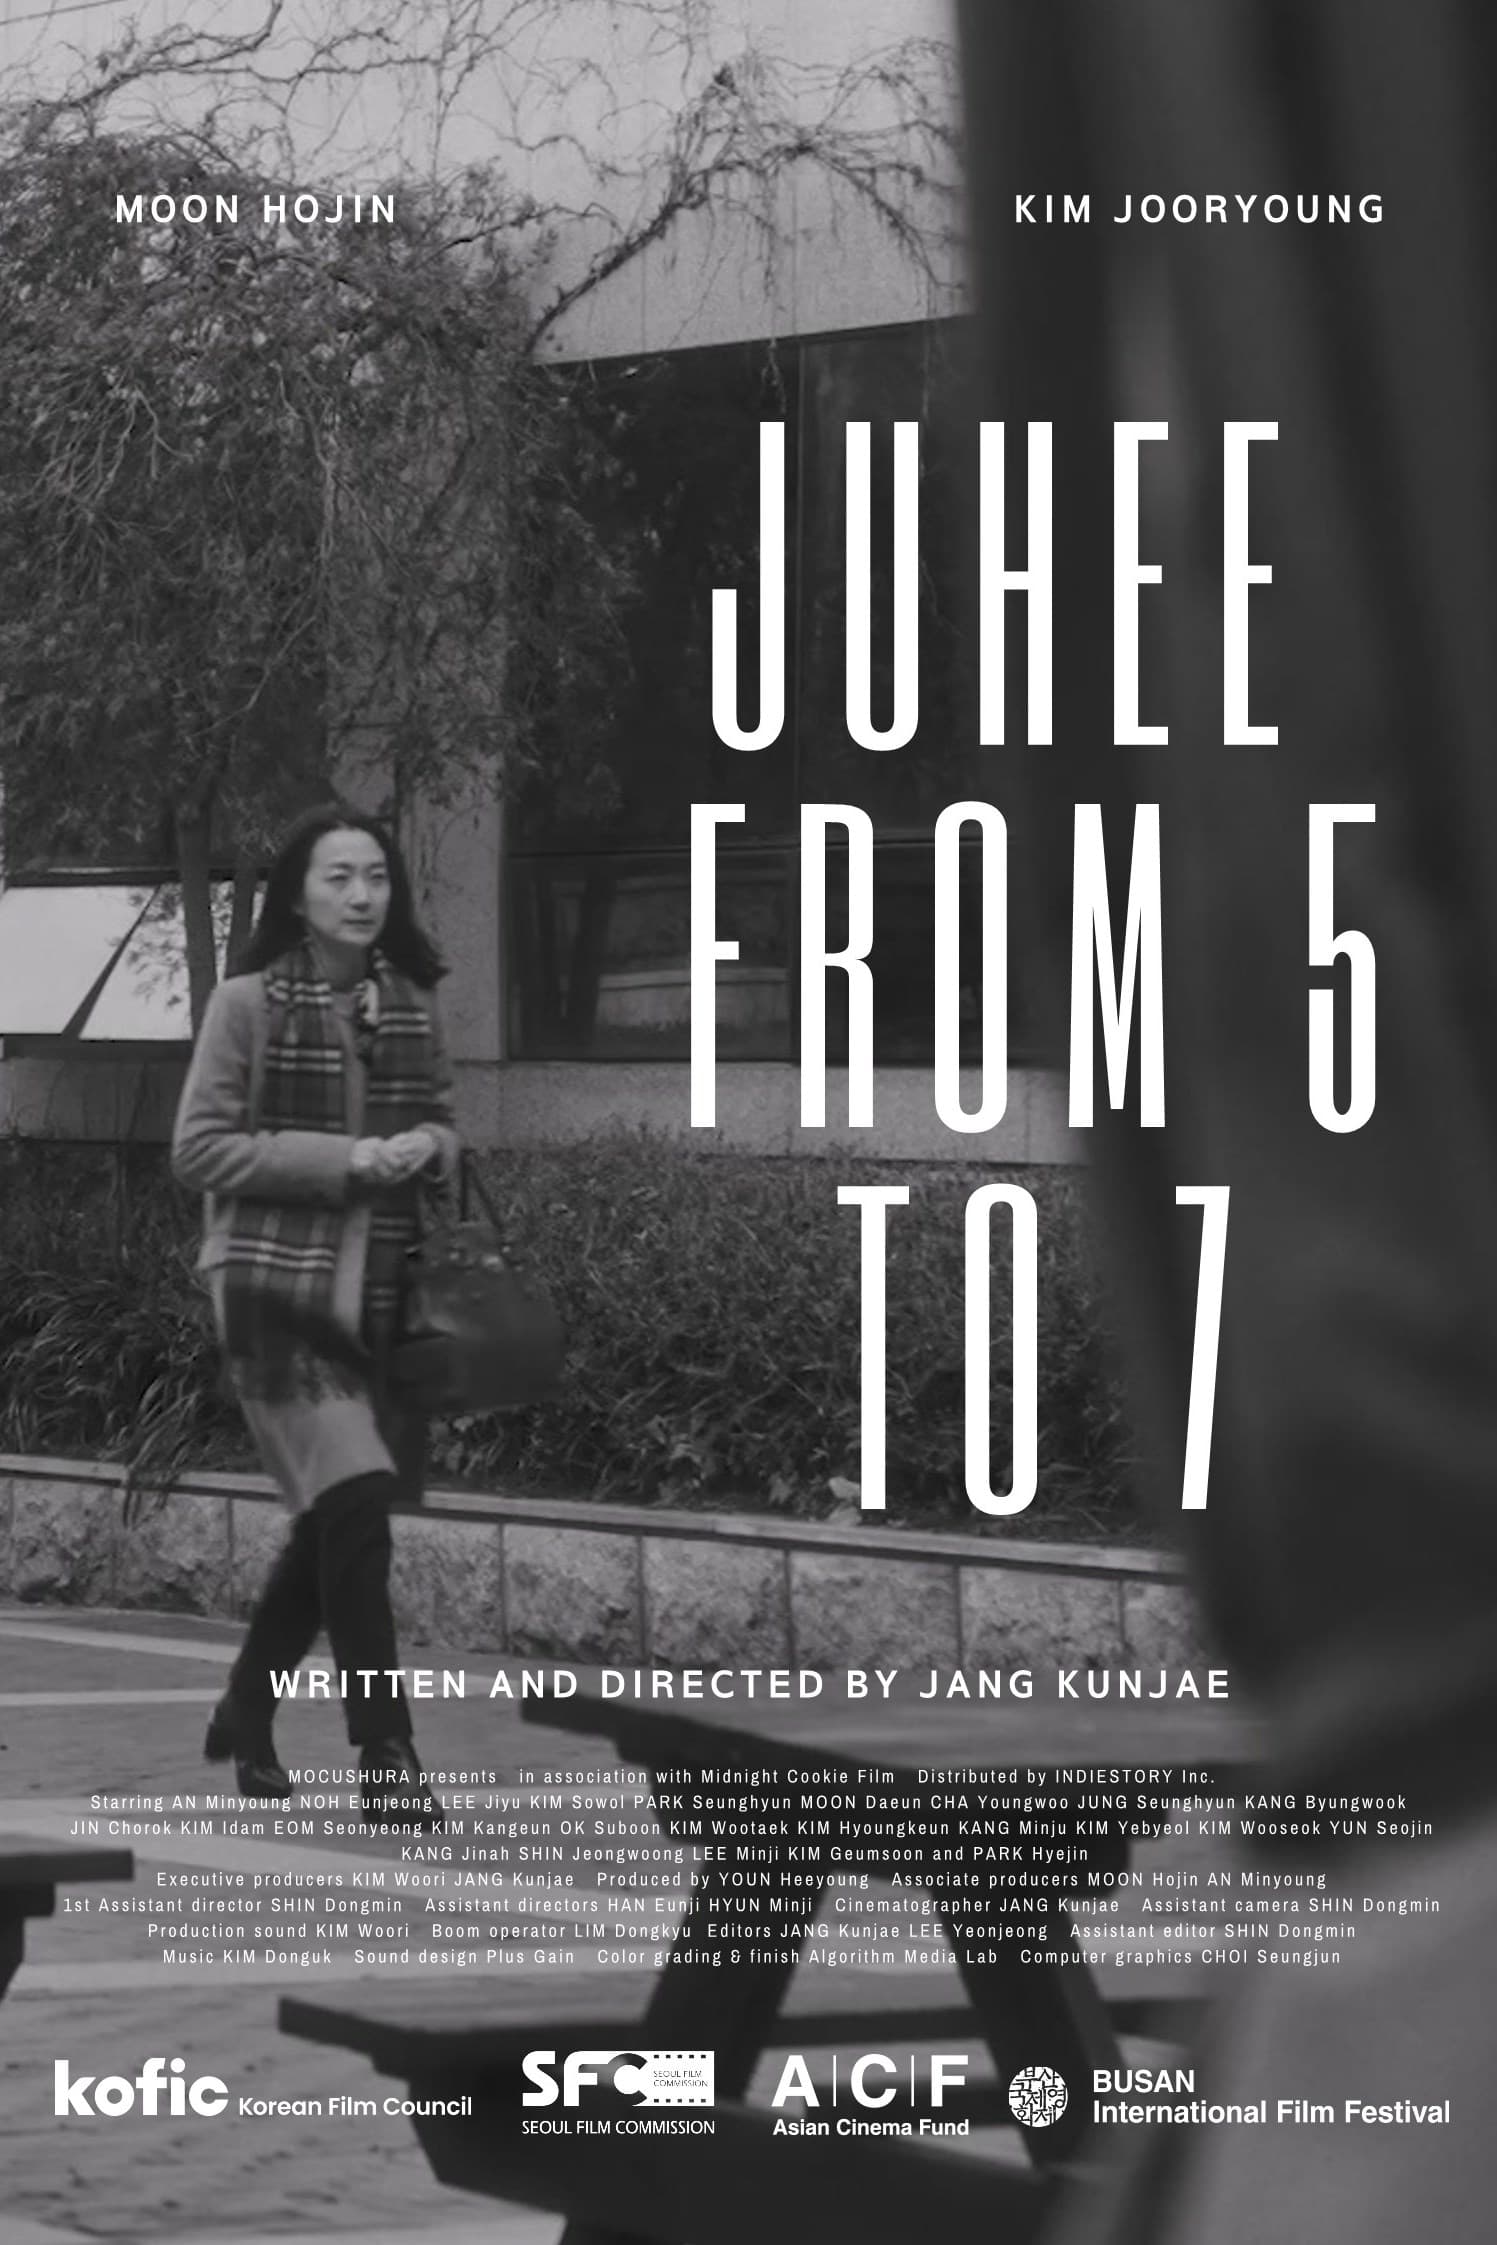 Juhee from 5 to 7